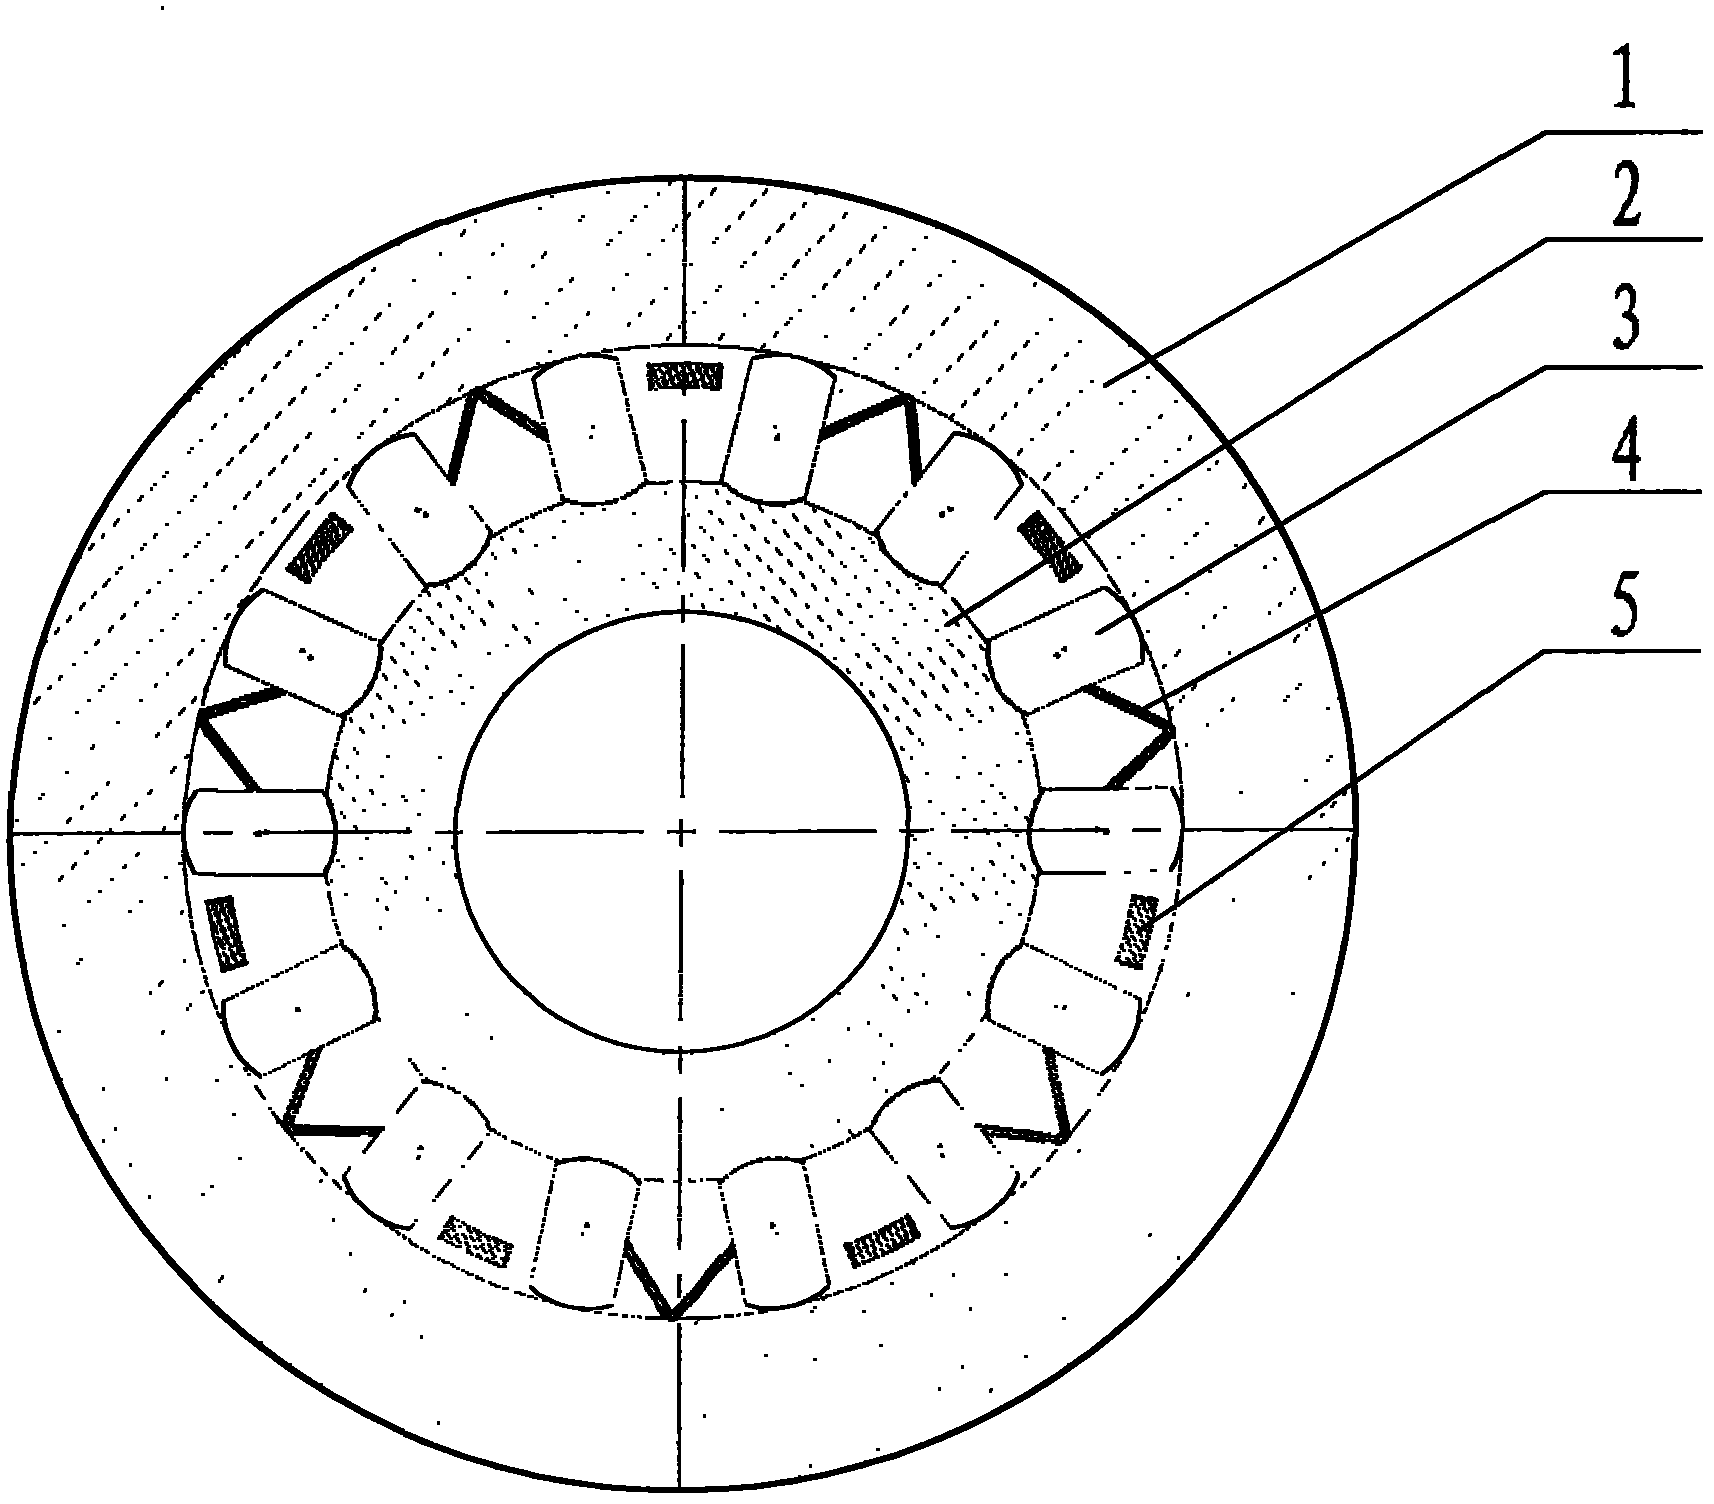 Reversible wedge-type overrunning clutch with grooves in inner ring